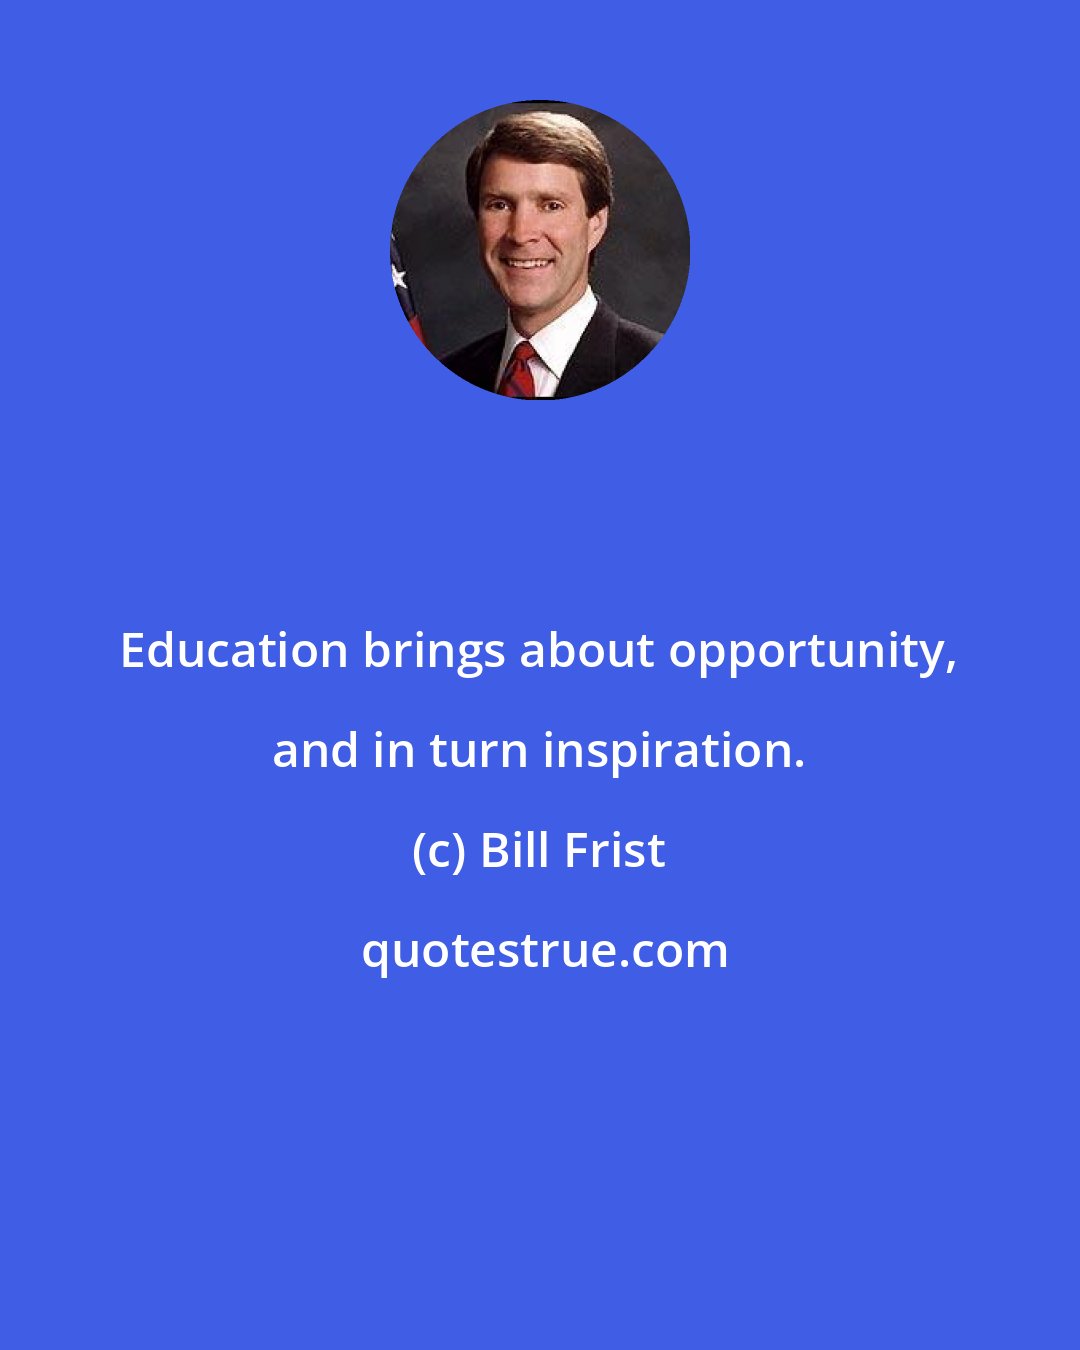 Bill Frist: Education brings about opportunity, and in turn inspiration.